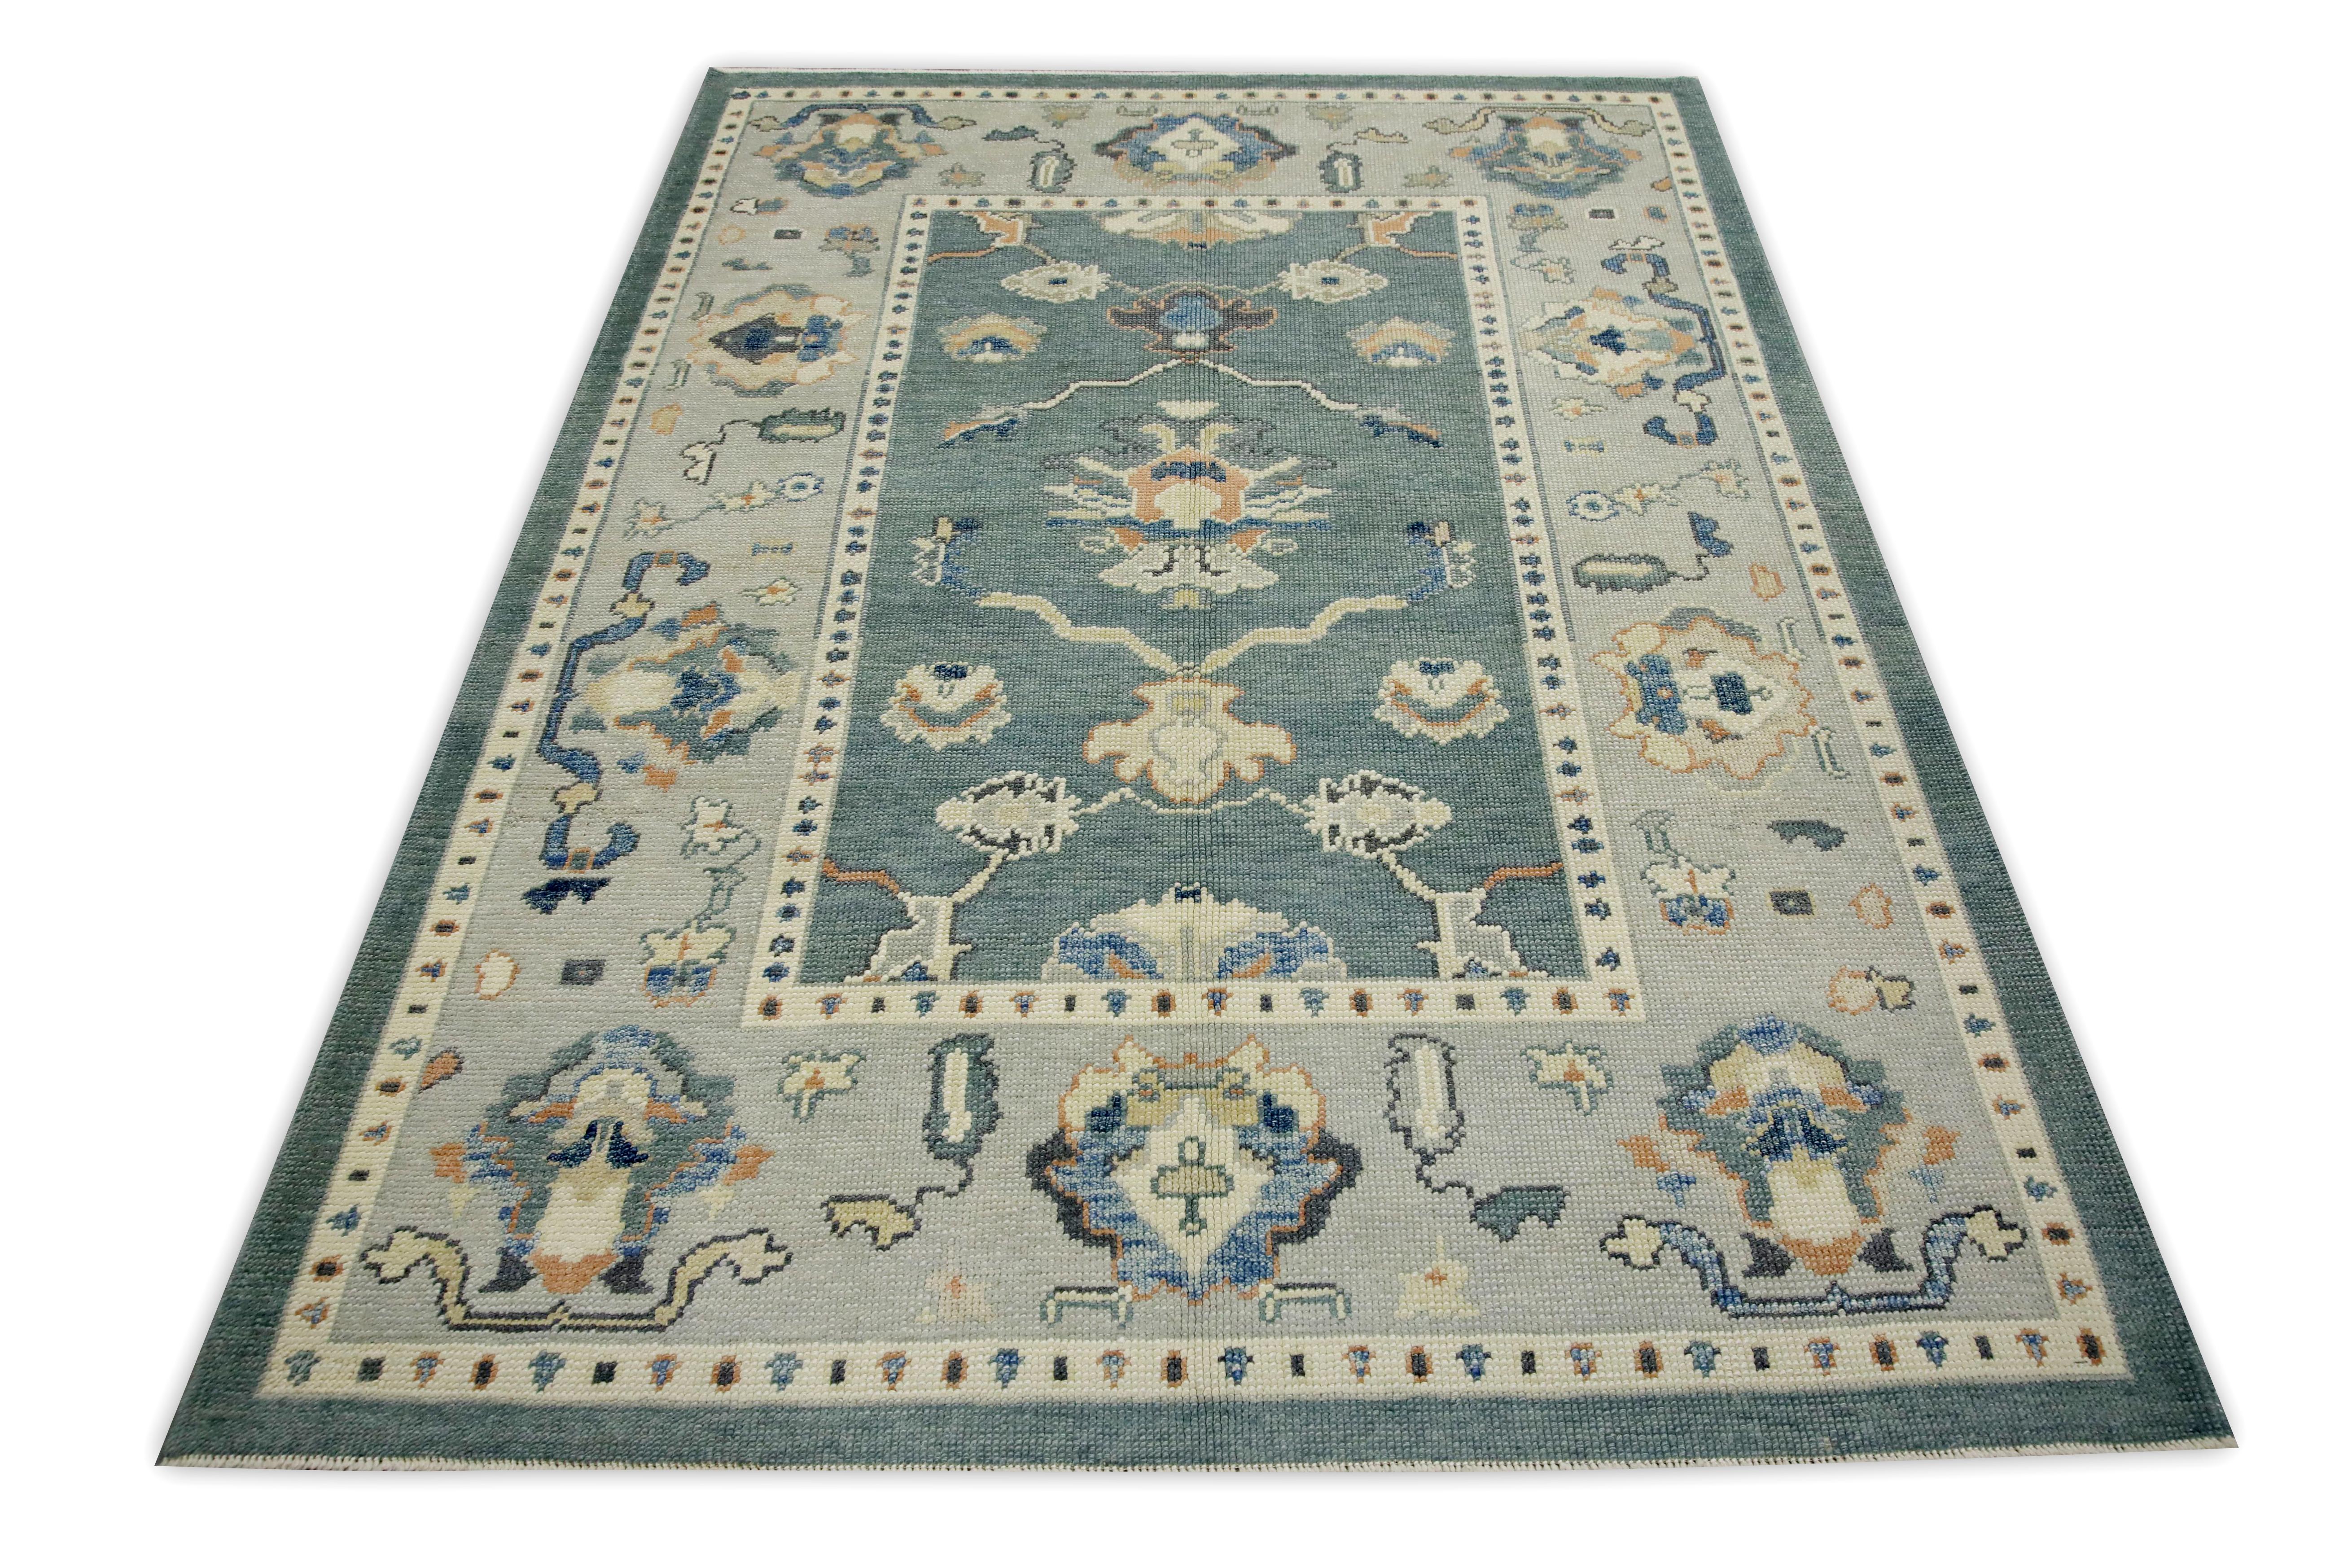 Contemporary Teal Floral Design Handwoven Wool Turkish Oushak Rug 5'3